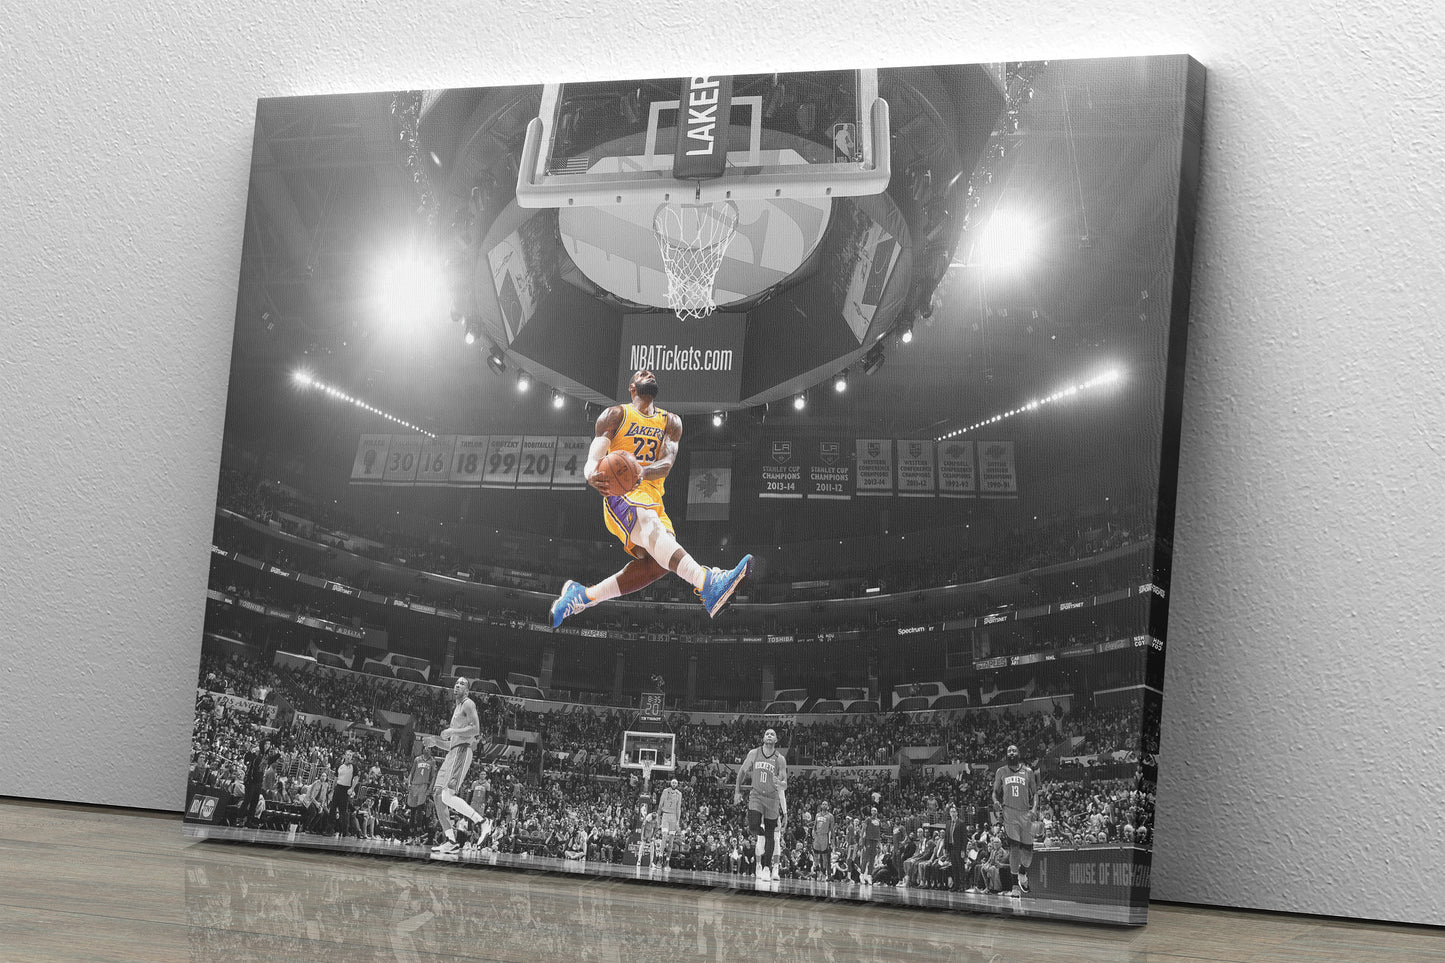 LeBron James Slam Dunk Poster Los Angeles Lakers Basketball Hand Made Posters Canvas Print Wall Art Home Decor